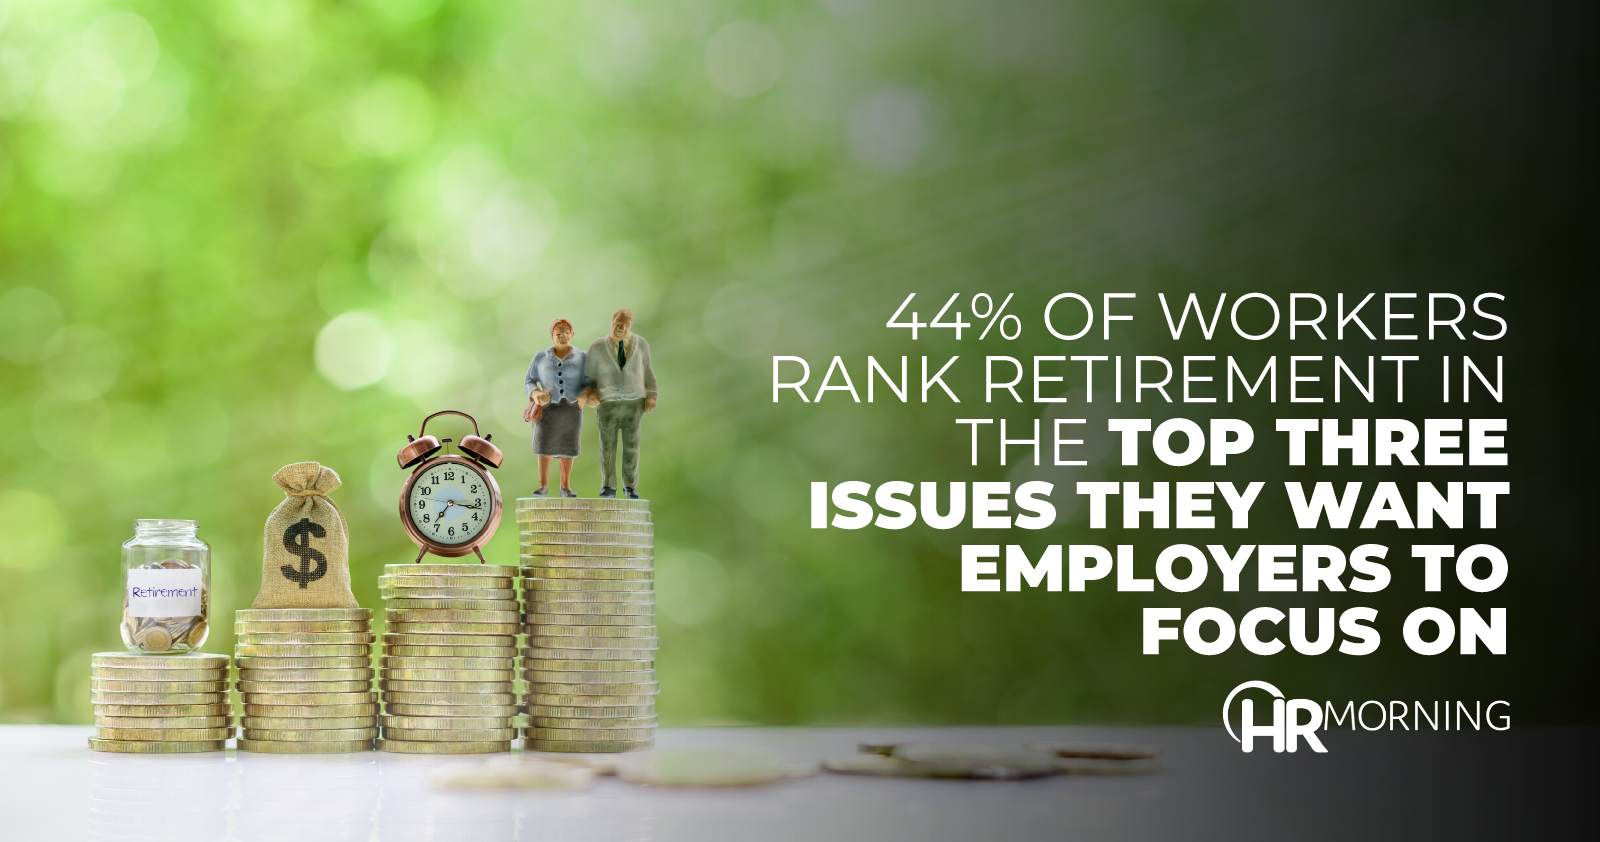 44% Of WorkersR ank Retirement In The TopT hree Issues They Want Employers To Focus On